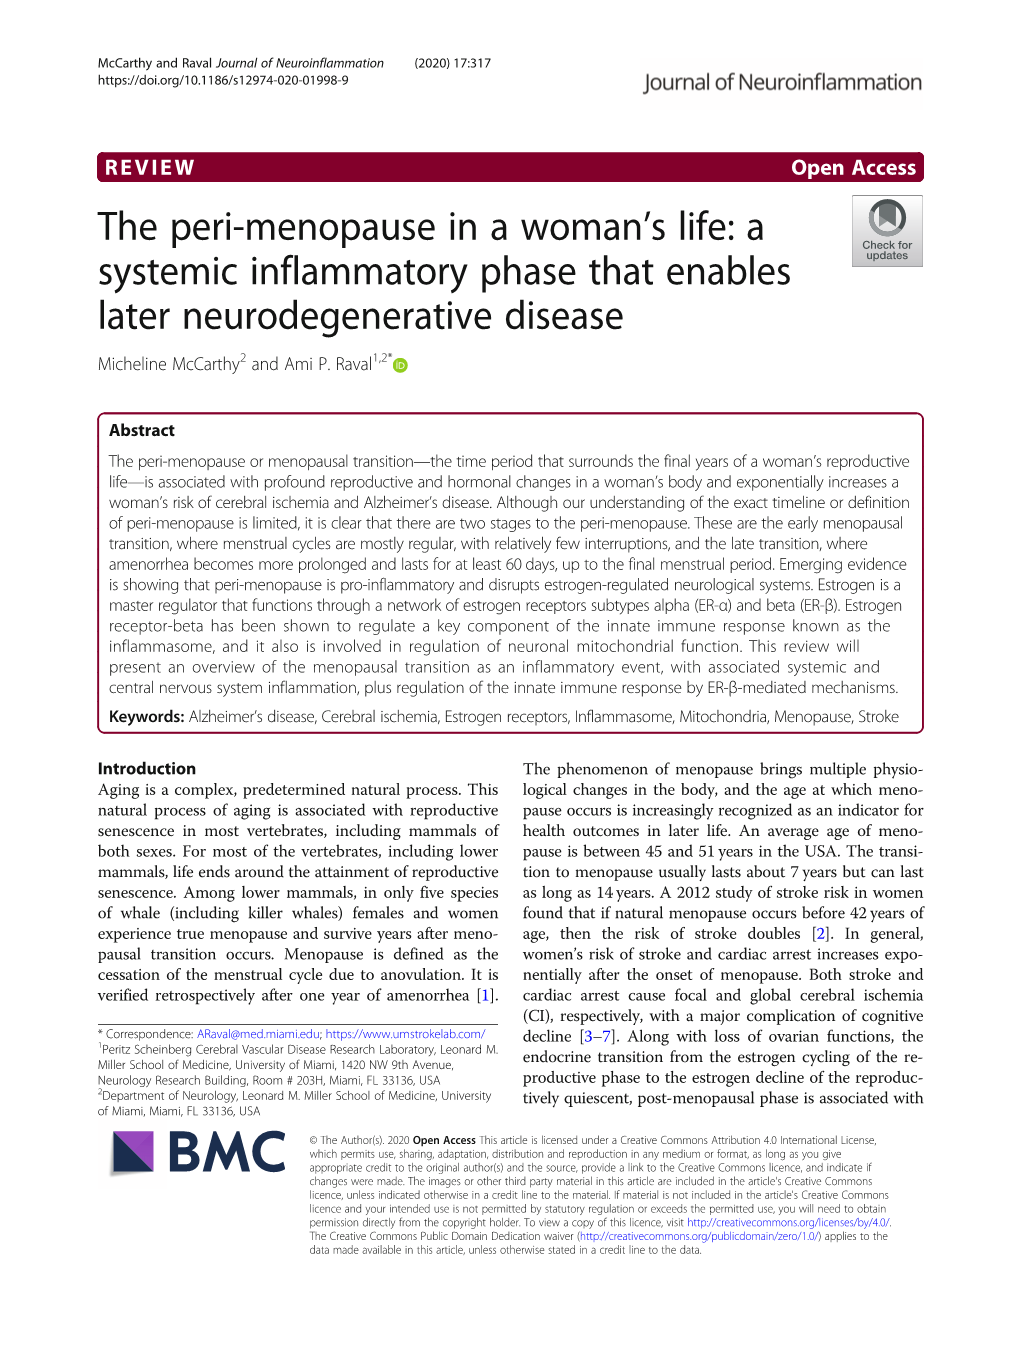 The Peri-Menopause in a Woman's Life